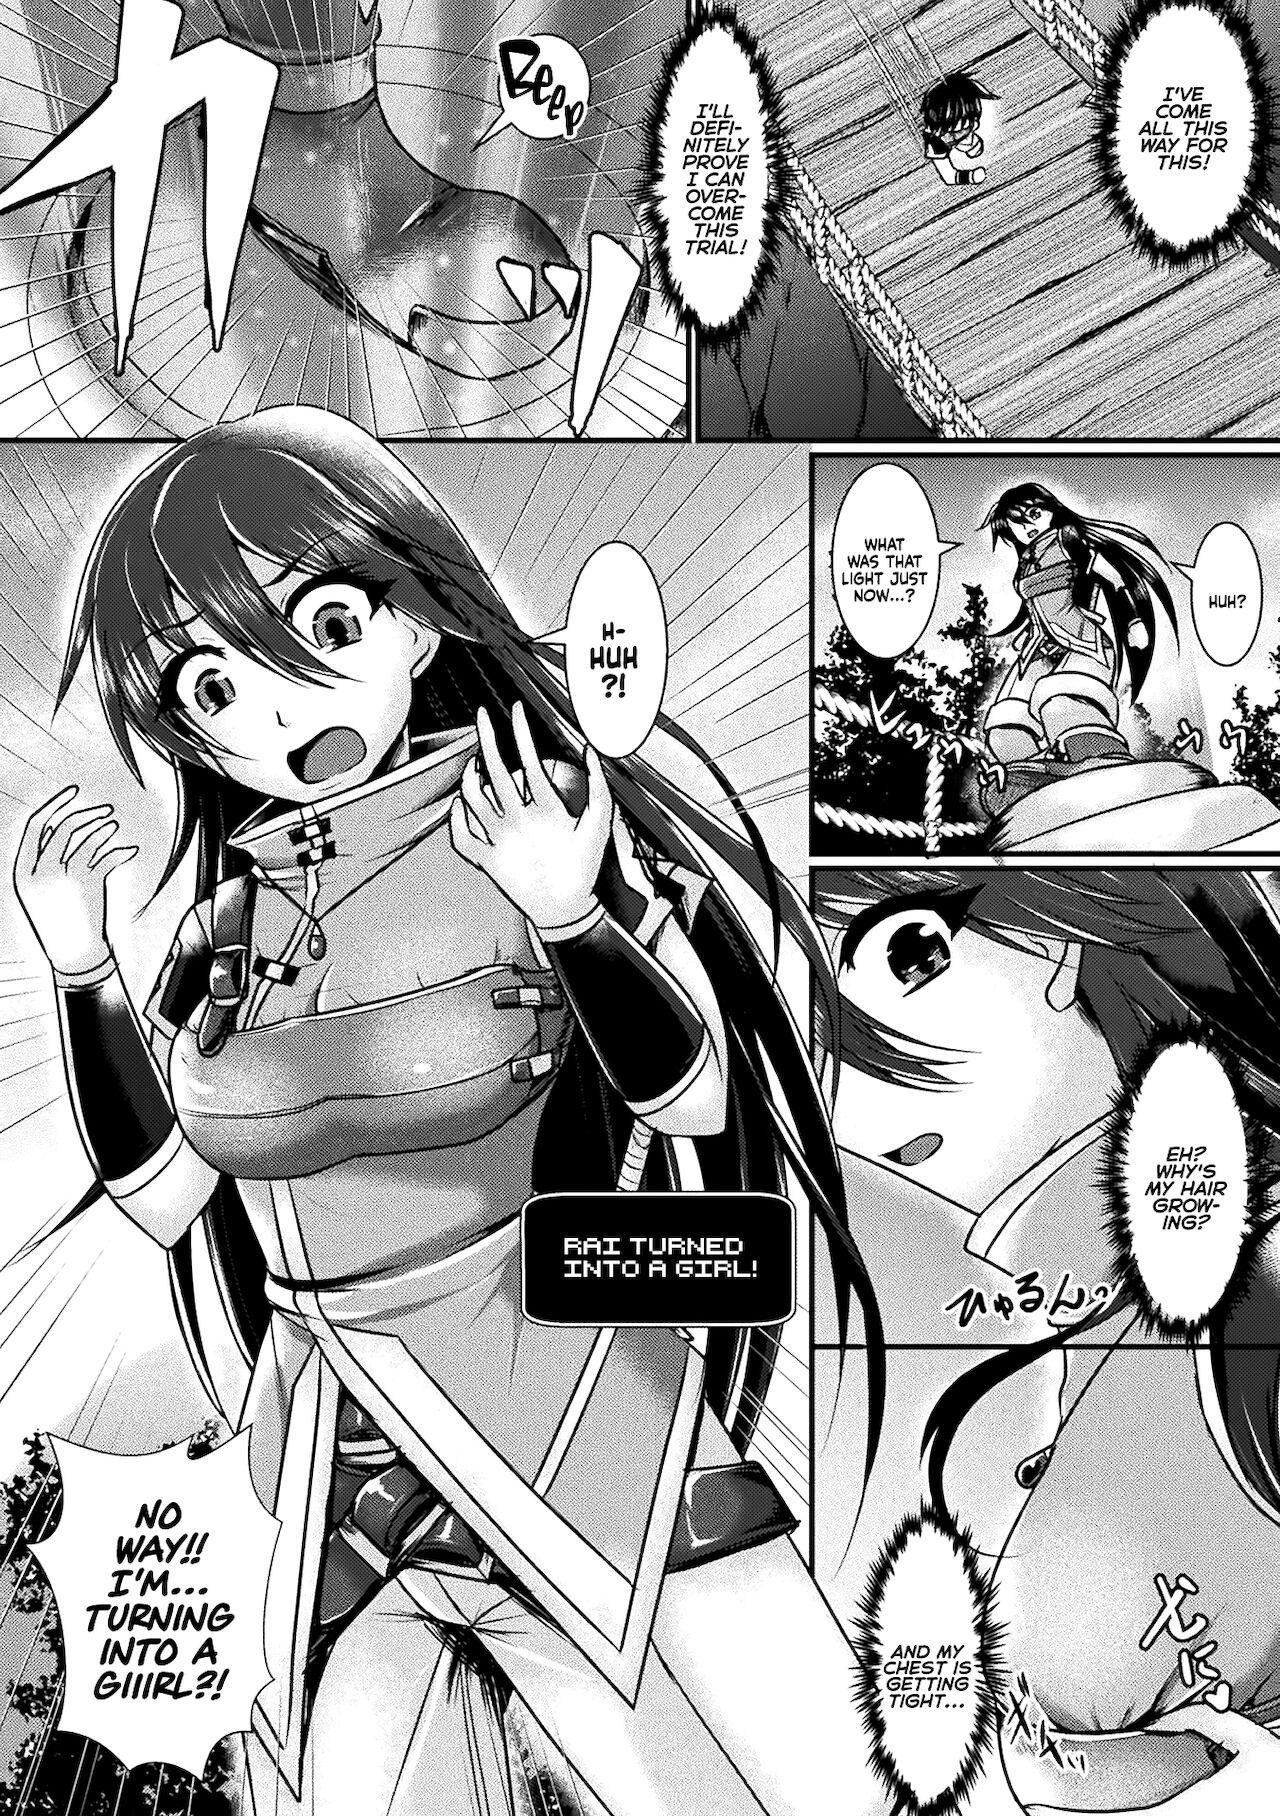 Boys The Final Trial - Ero trap dungeon Cachonda - Page 2